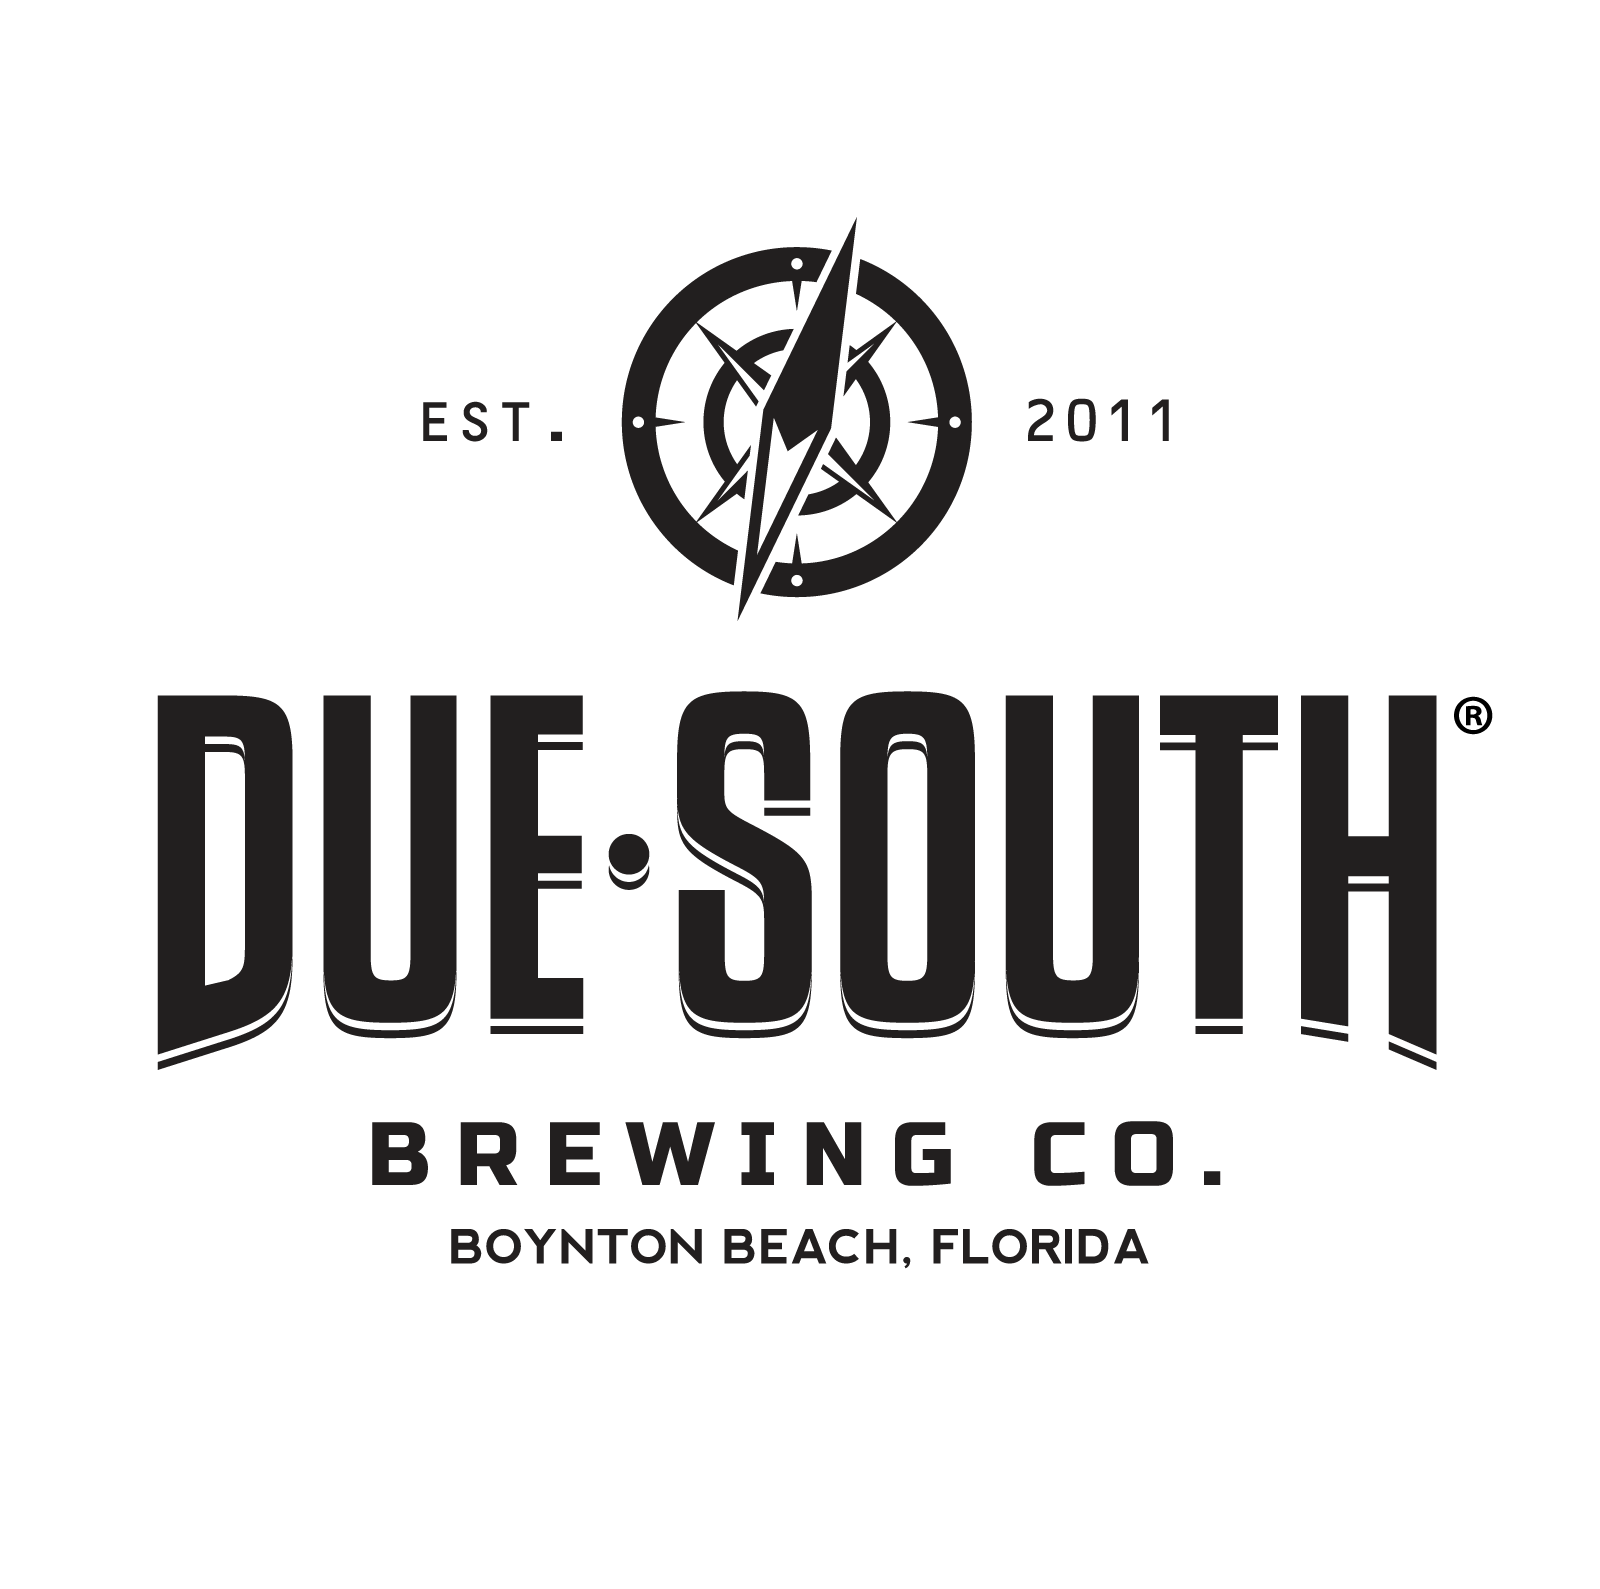 South Logo - Media Kit – Due South Brewing Co.